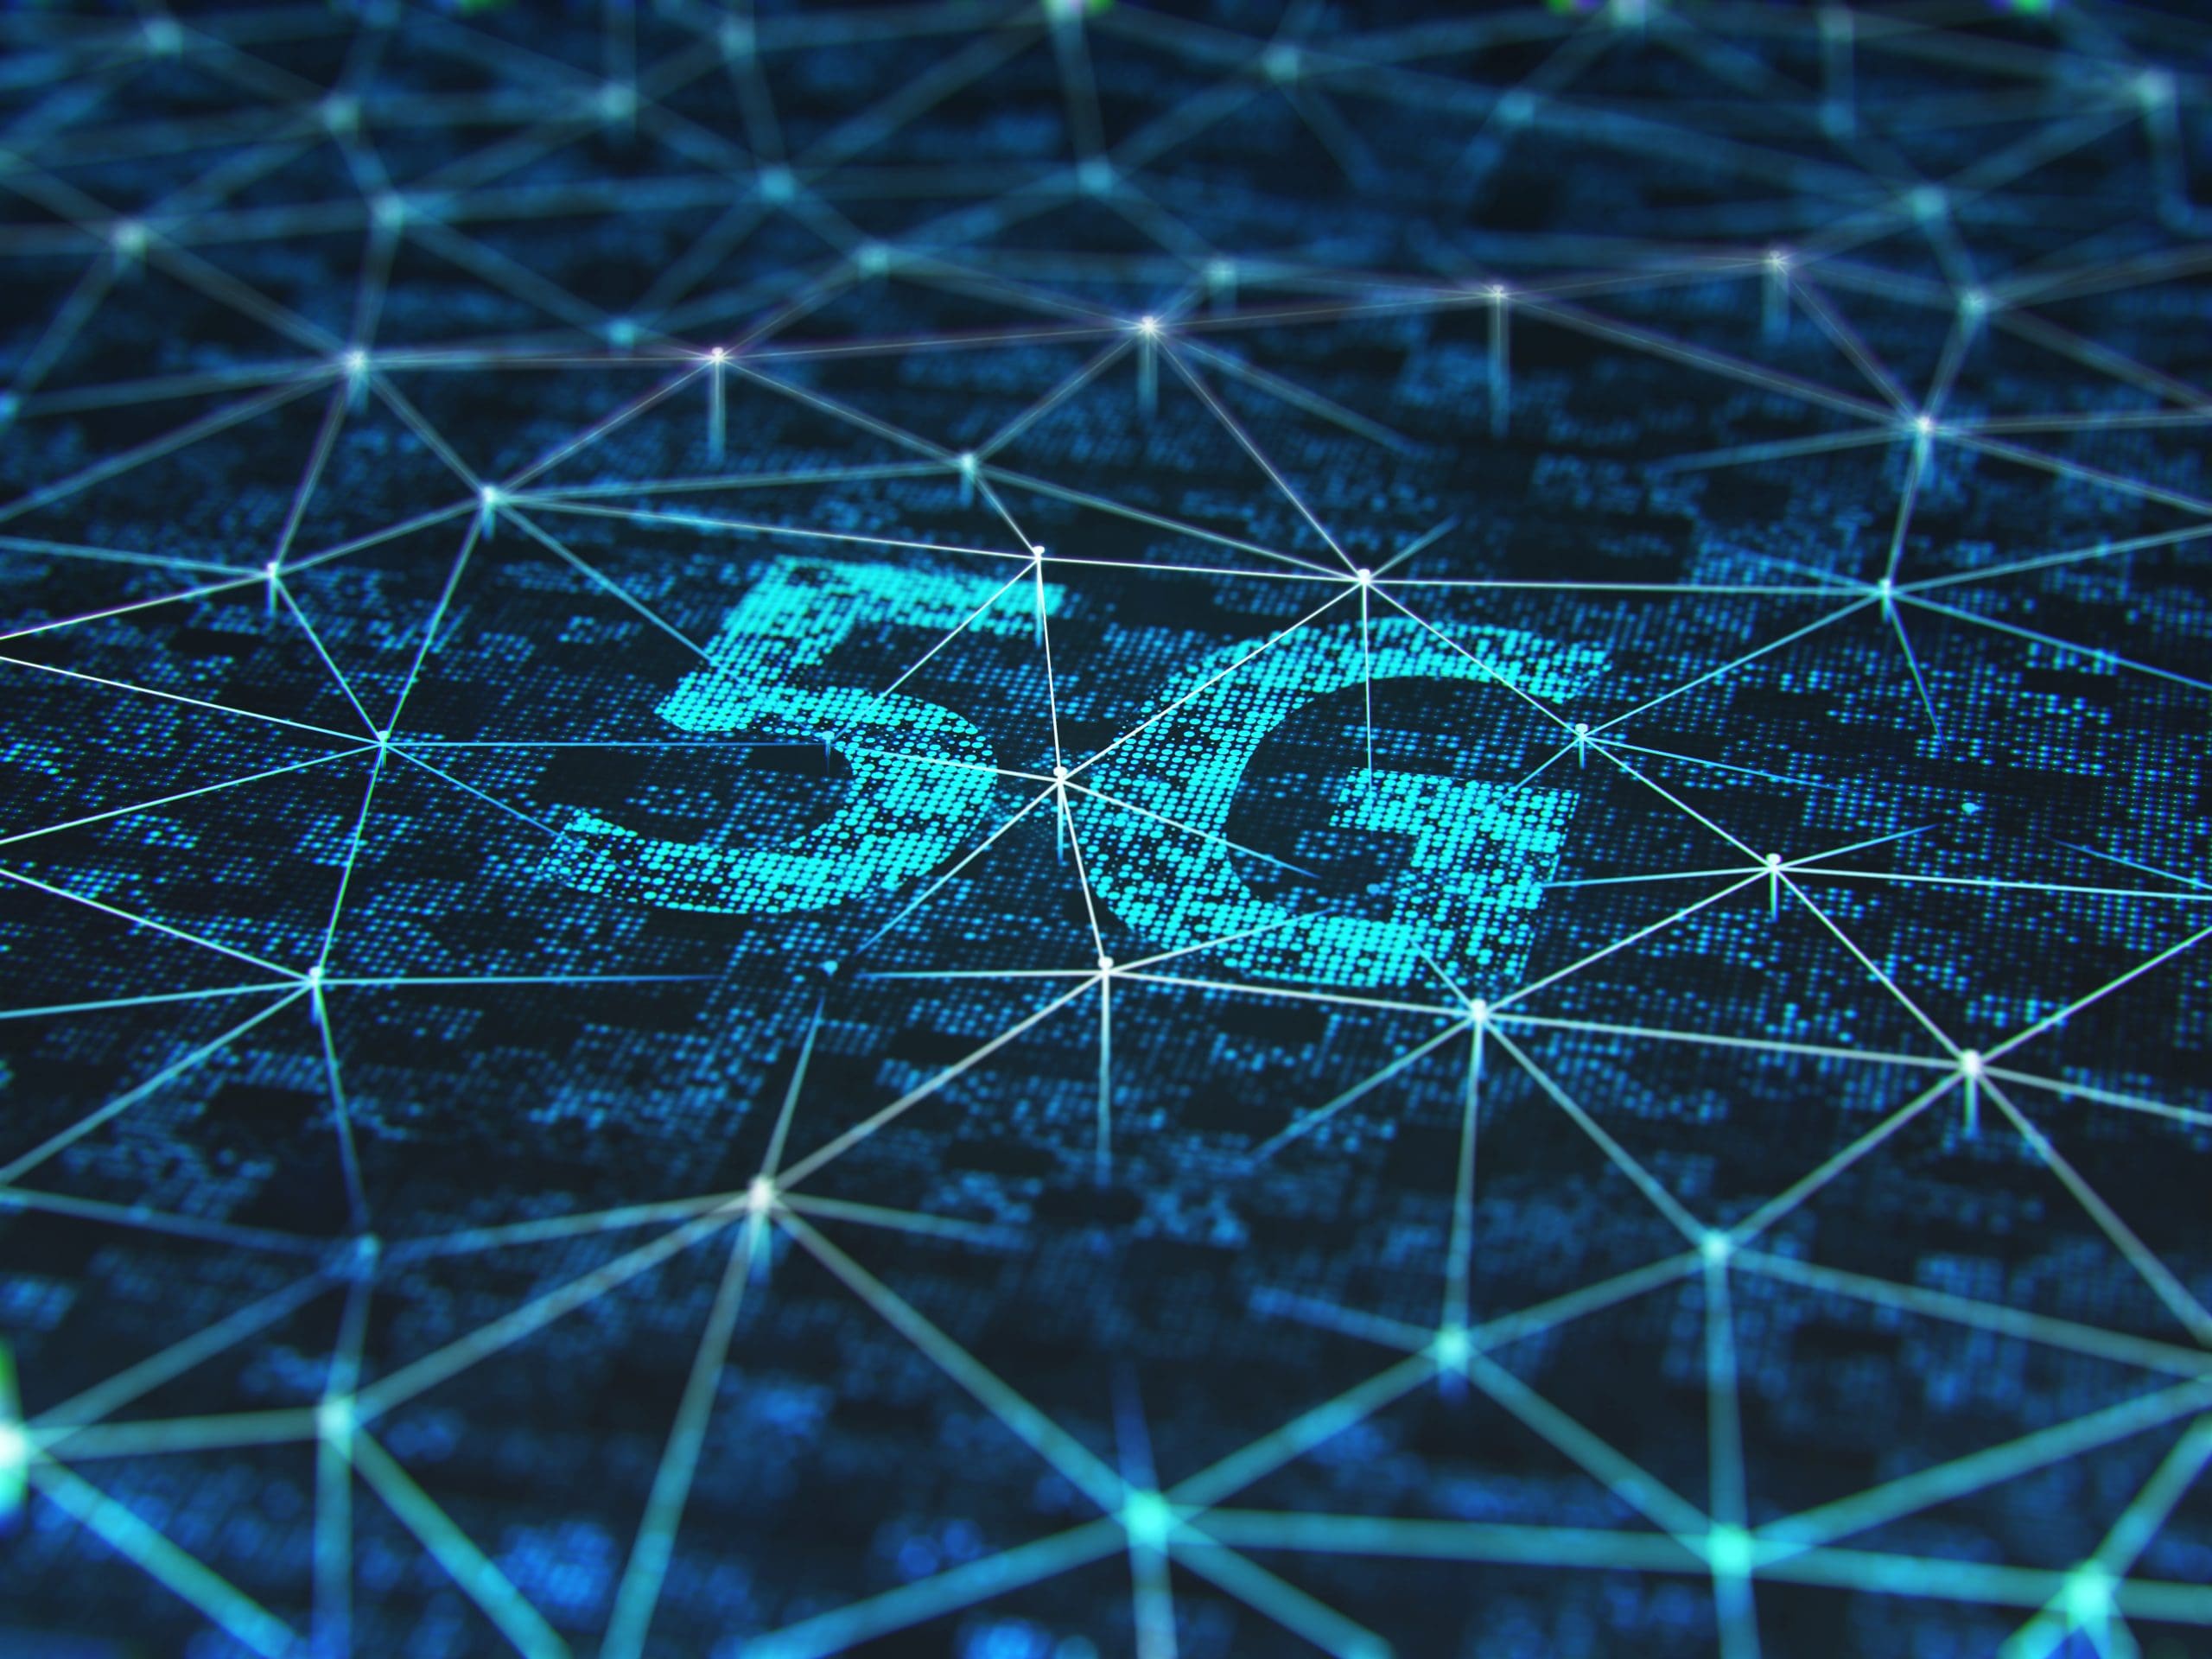 The 5g symbol is shown on a blue background.